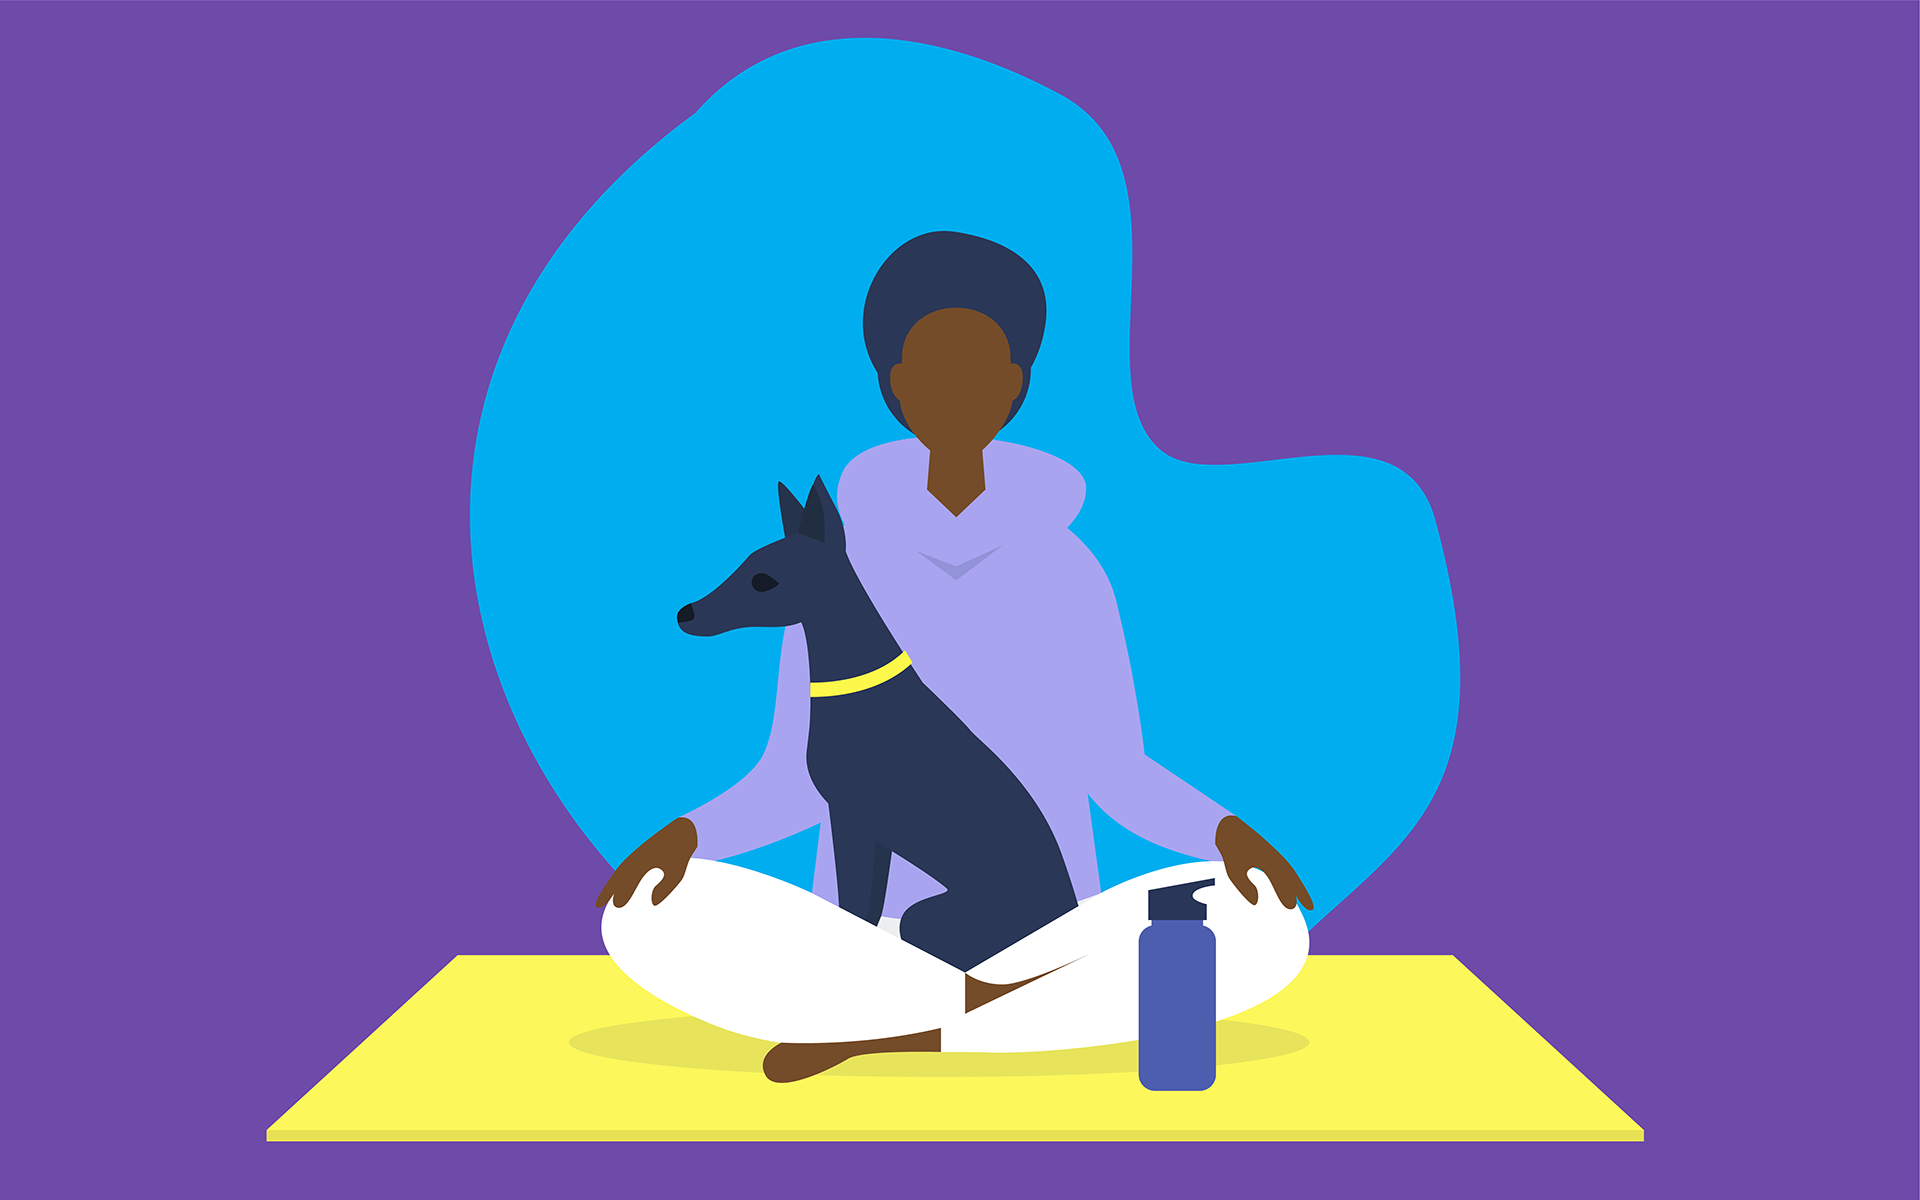 Illustration of a man with light skin and dark hair sitting on a yellow yoga mat cross-legged with a black dog in his lap. The background is purple. at-home meditation retreat